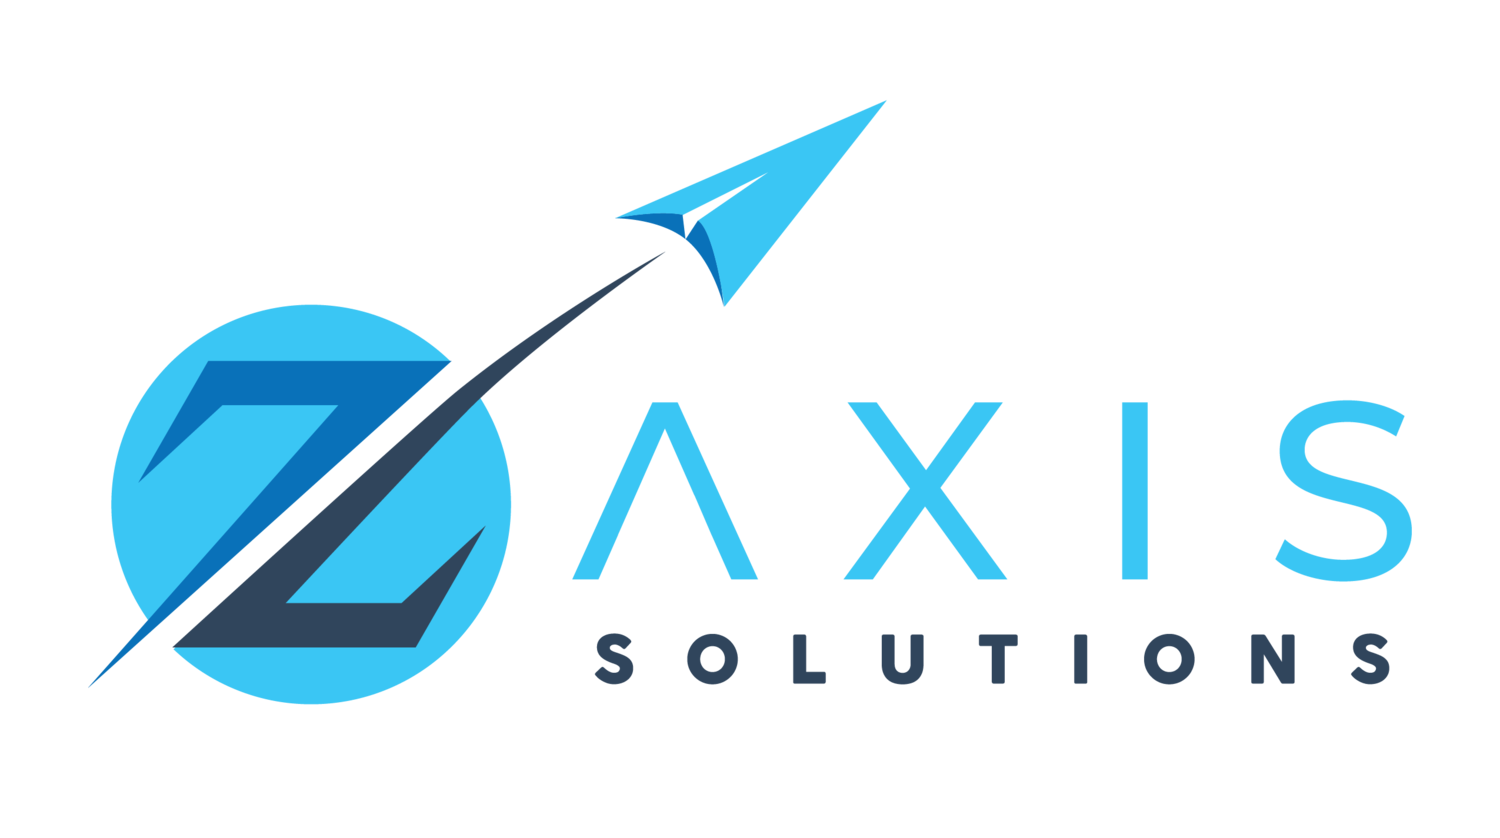 Z Axis Solutions